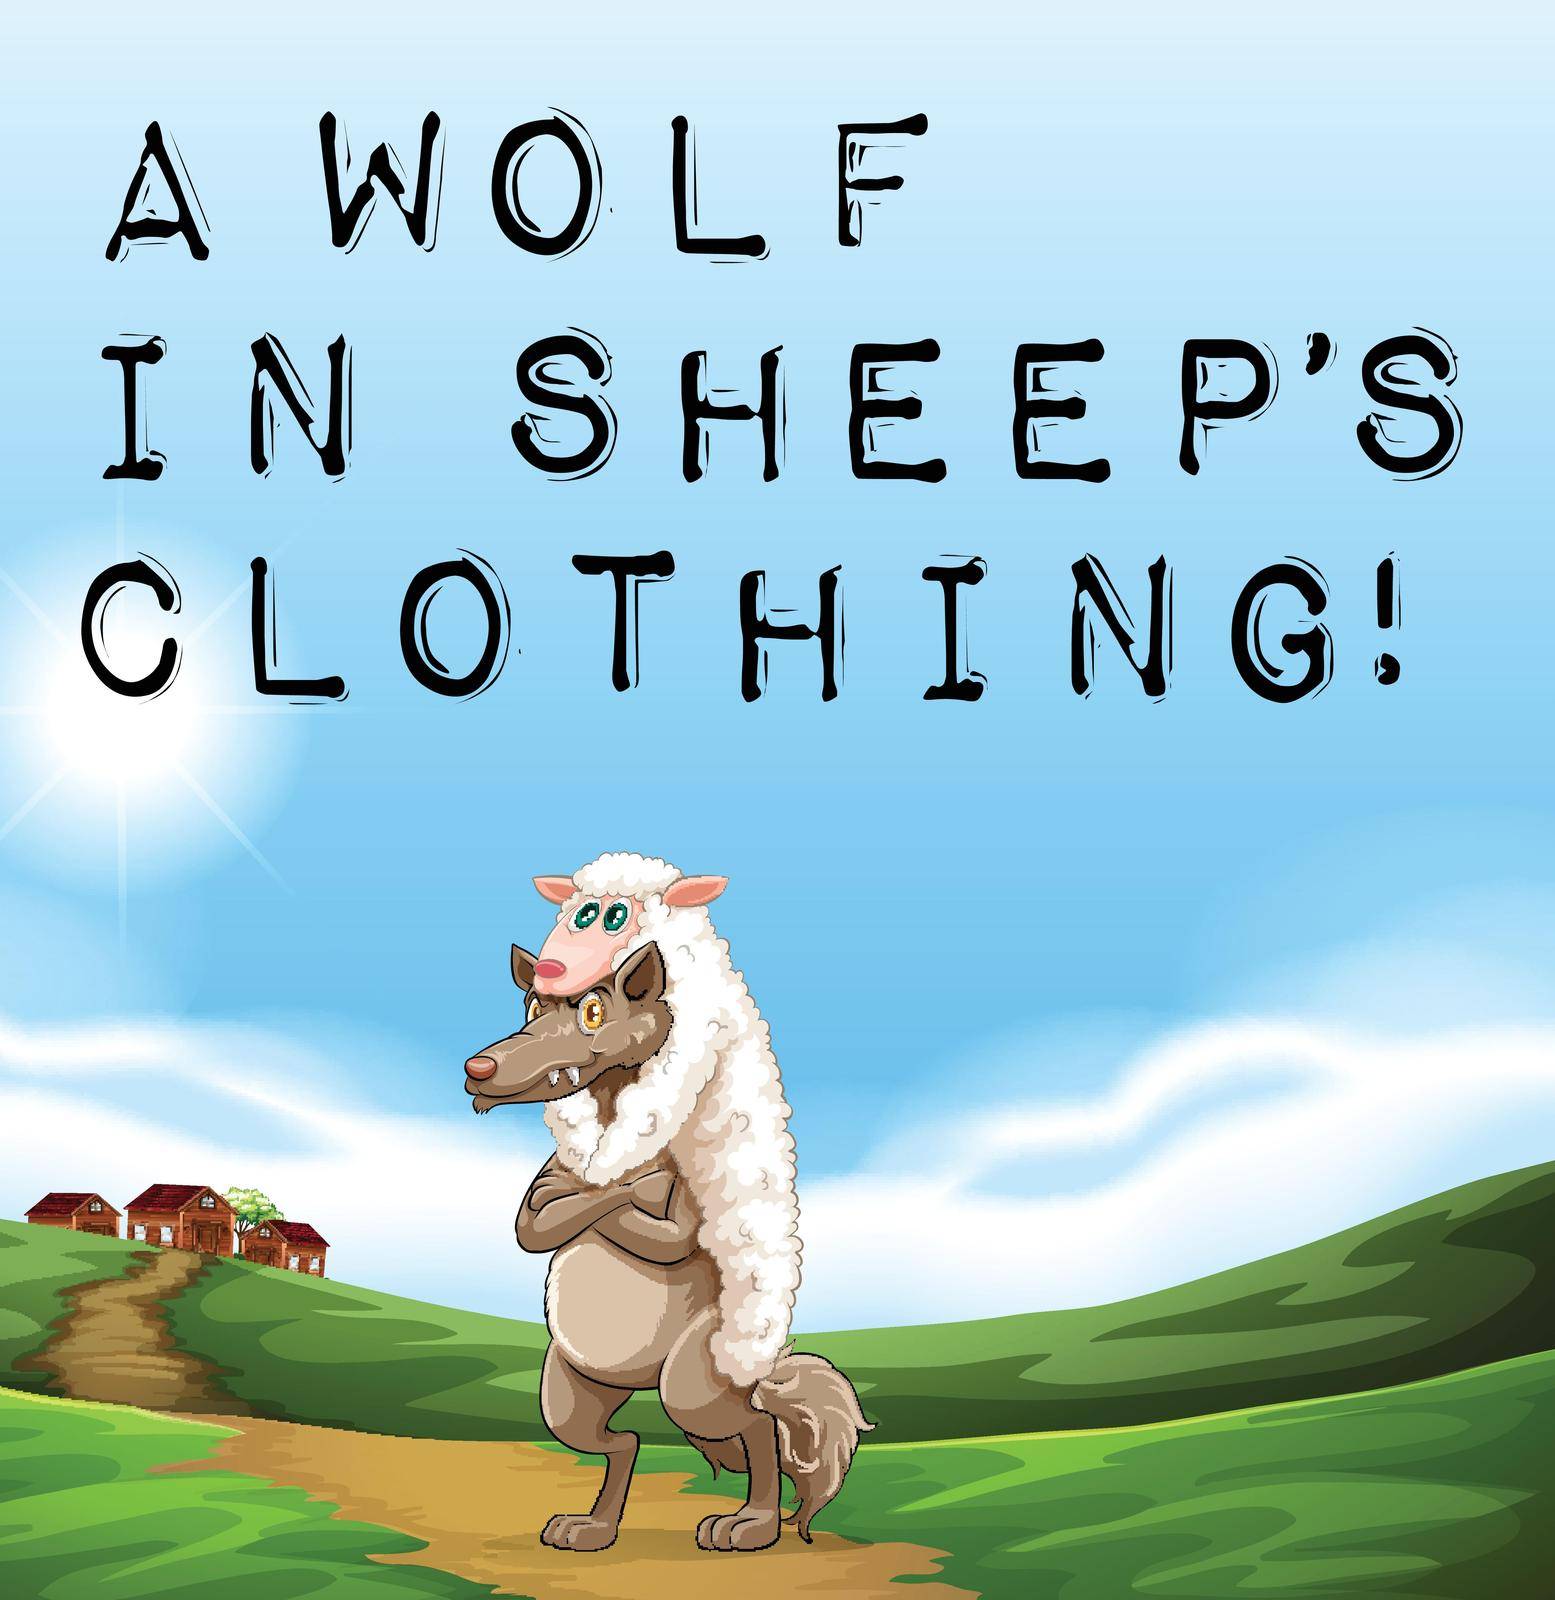 A poster showing a wolf in sheep's clothing